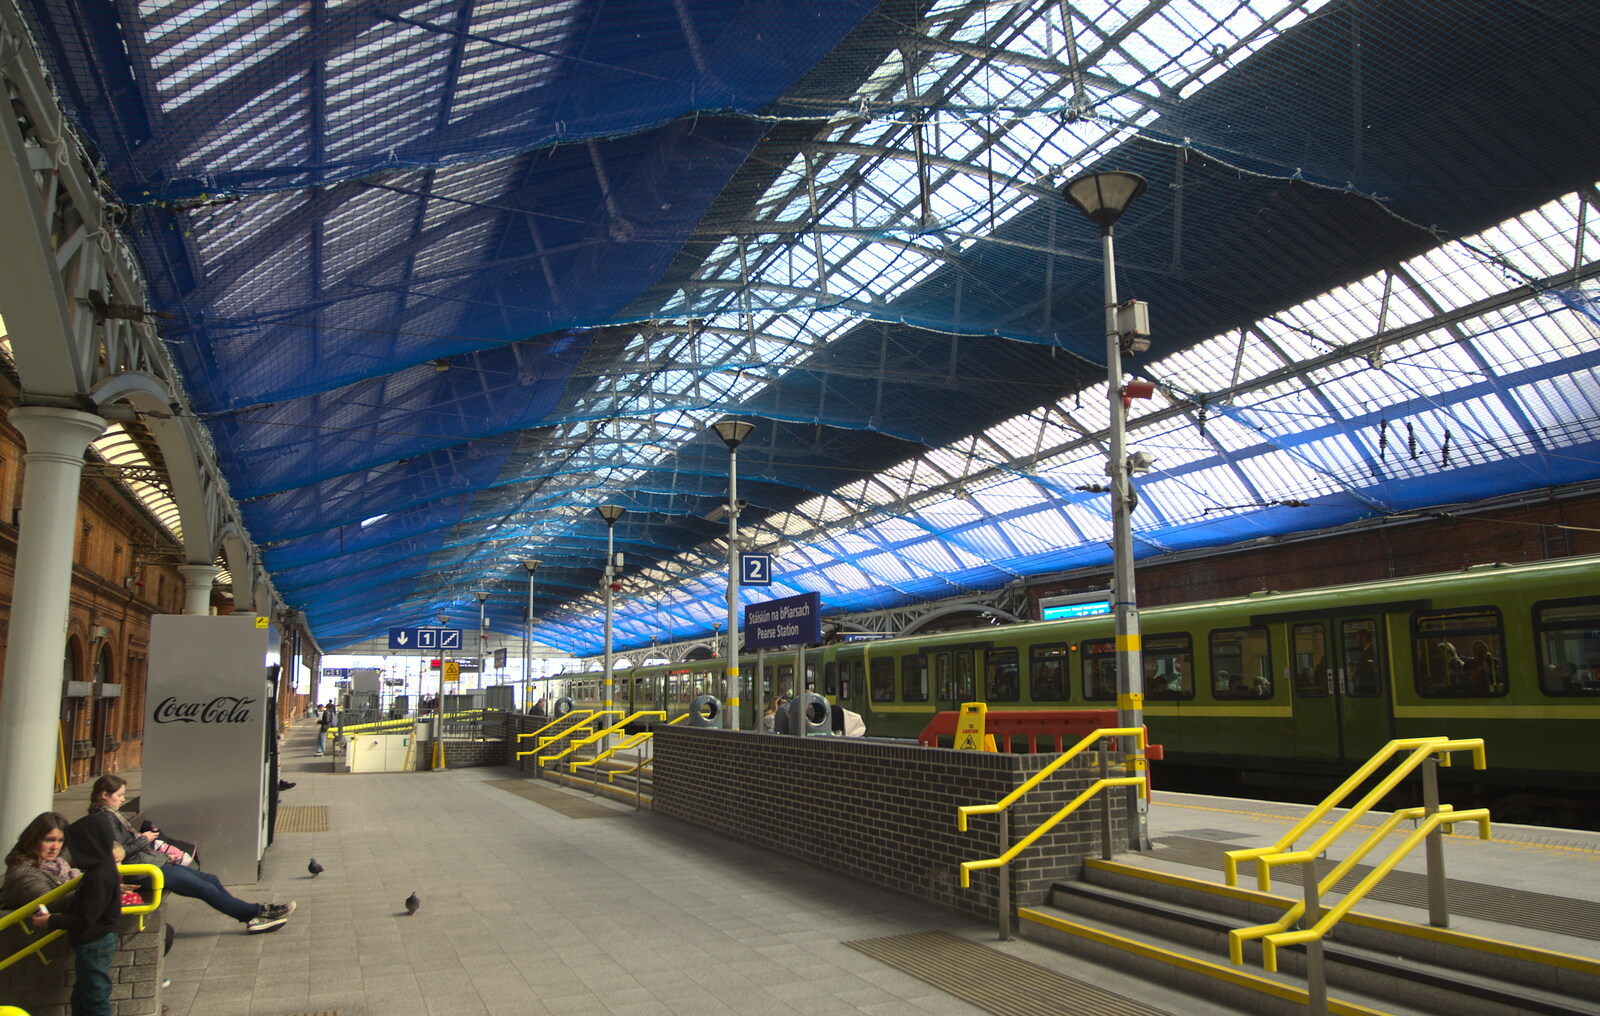 Pearse Station and a DART train from Temple Bar and Dun Laoghaire, Dublin, Ireland - 16th April 2015